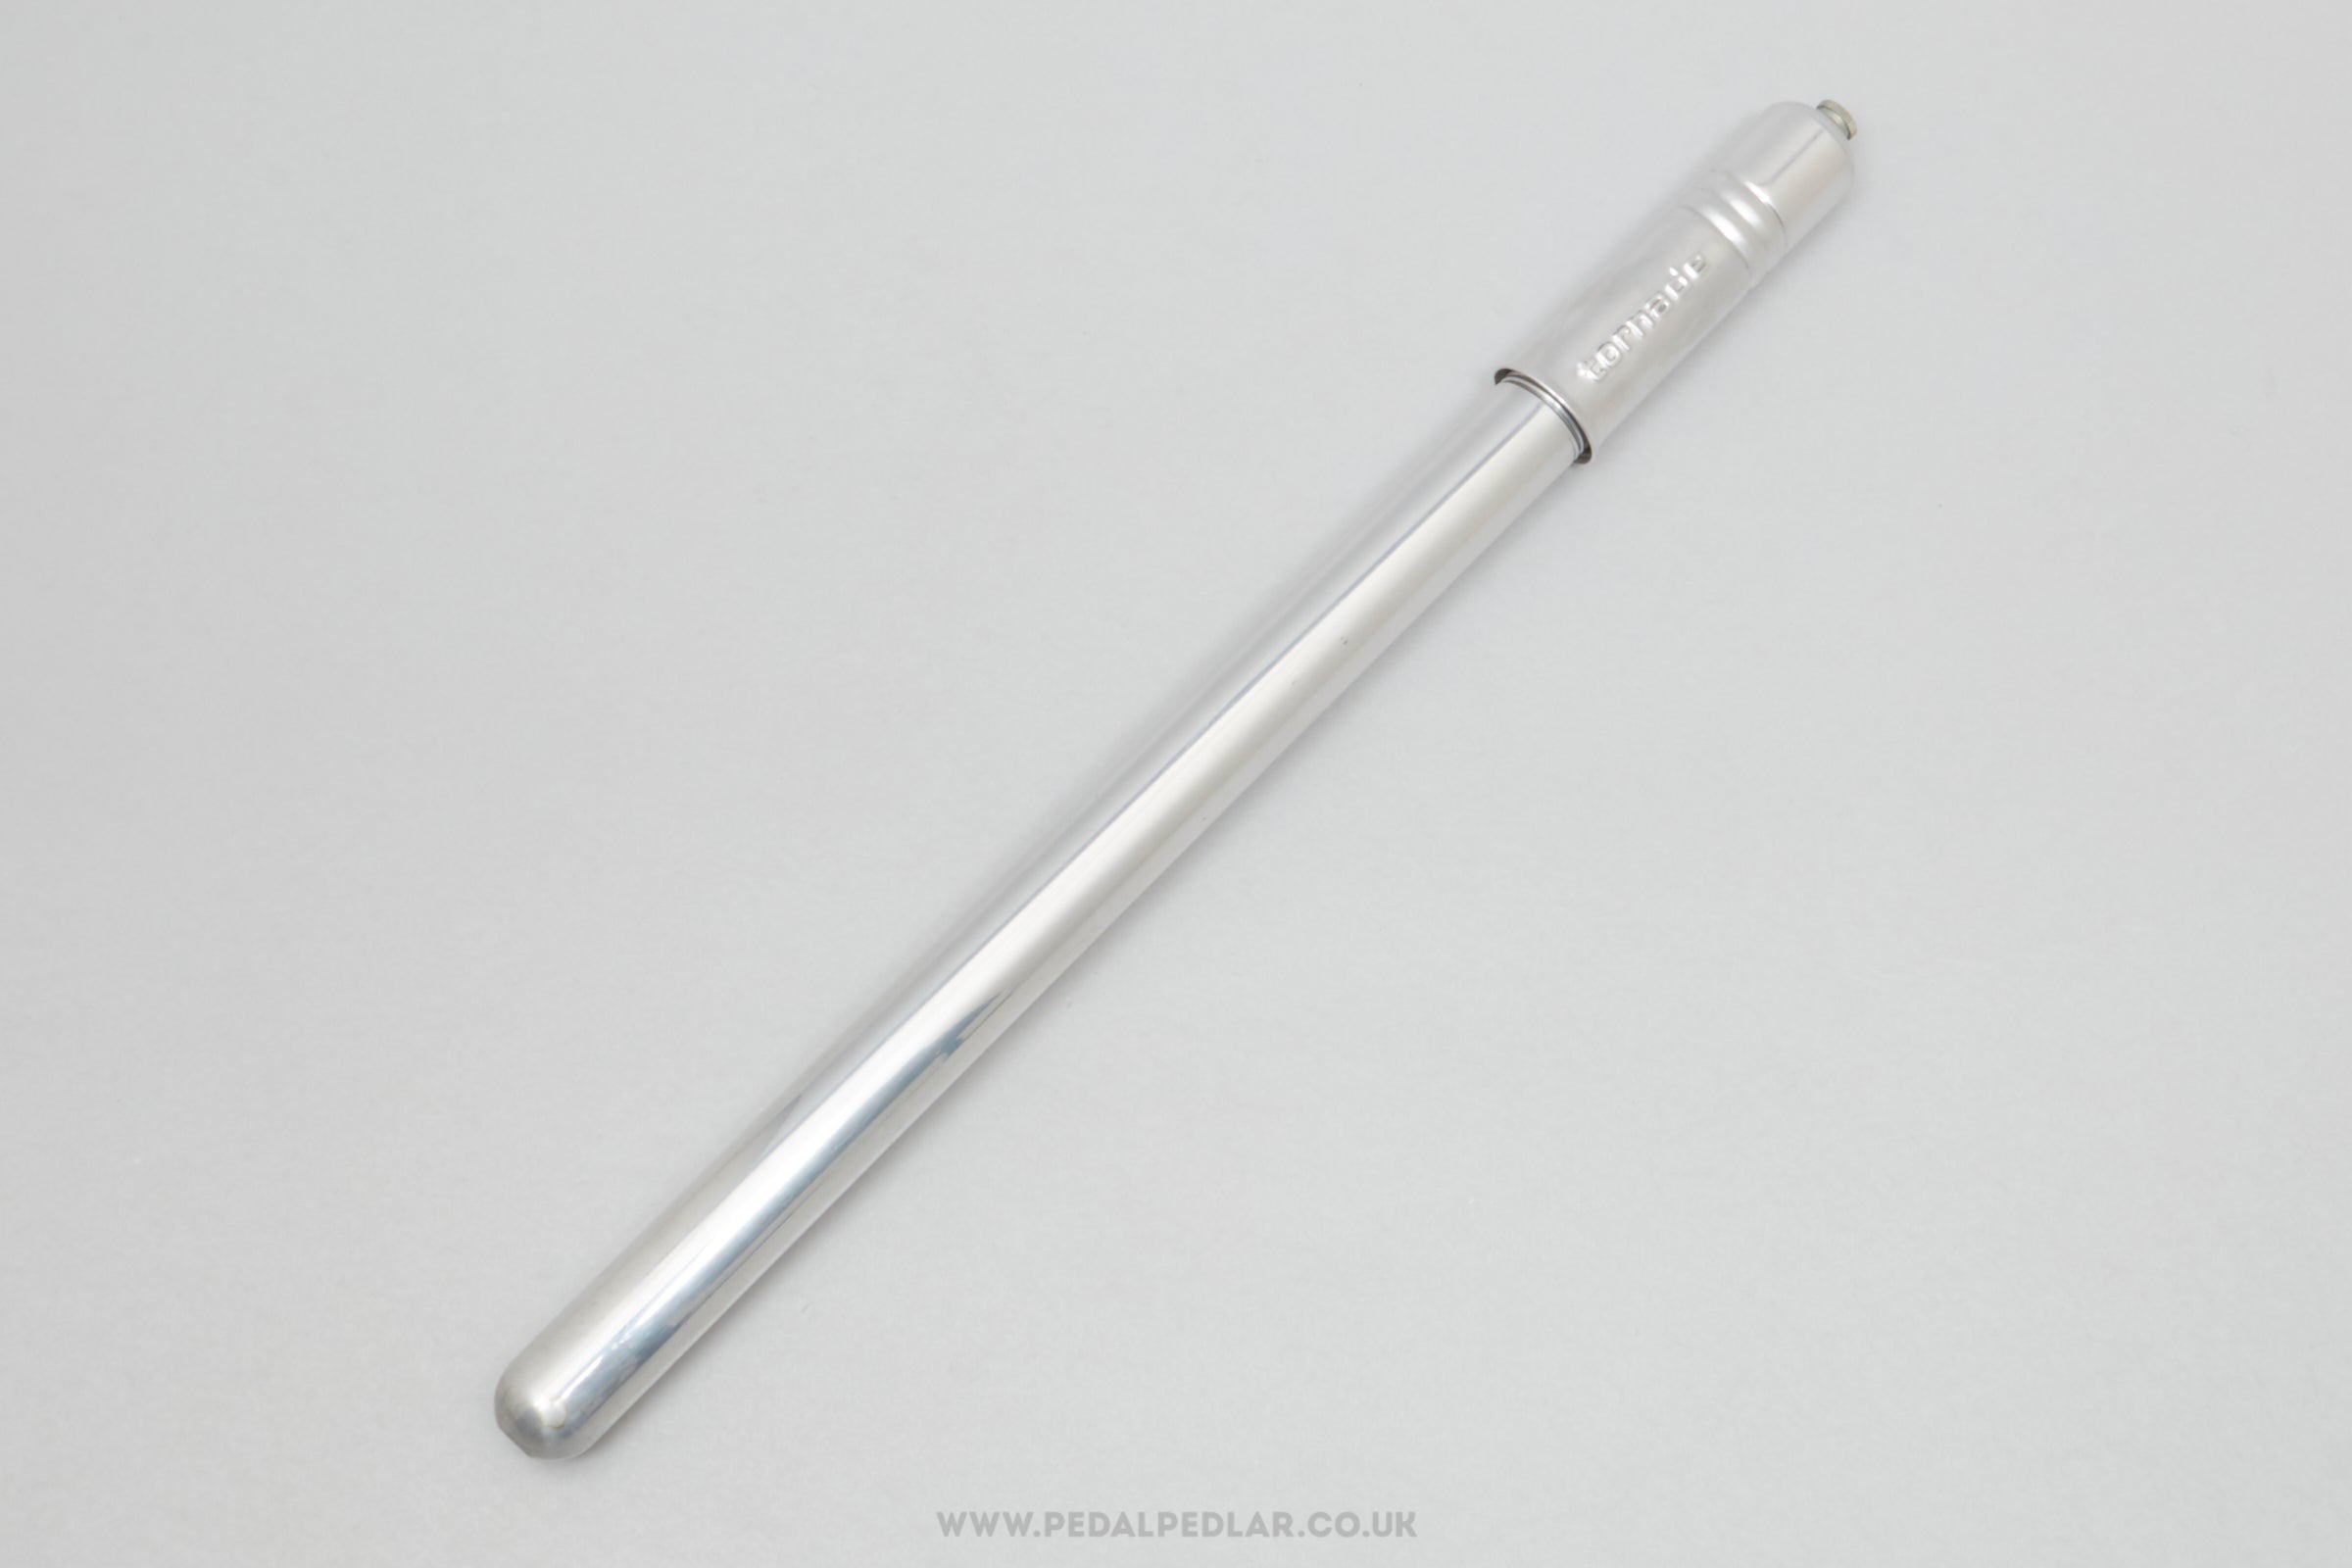 Tornade NOS Vintage Silver 38 - 41 cm Frame Peg Fit Bike Pump - Pedal Pedlar - Buy New Old Stock Cycle Accessories